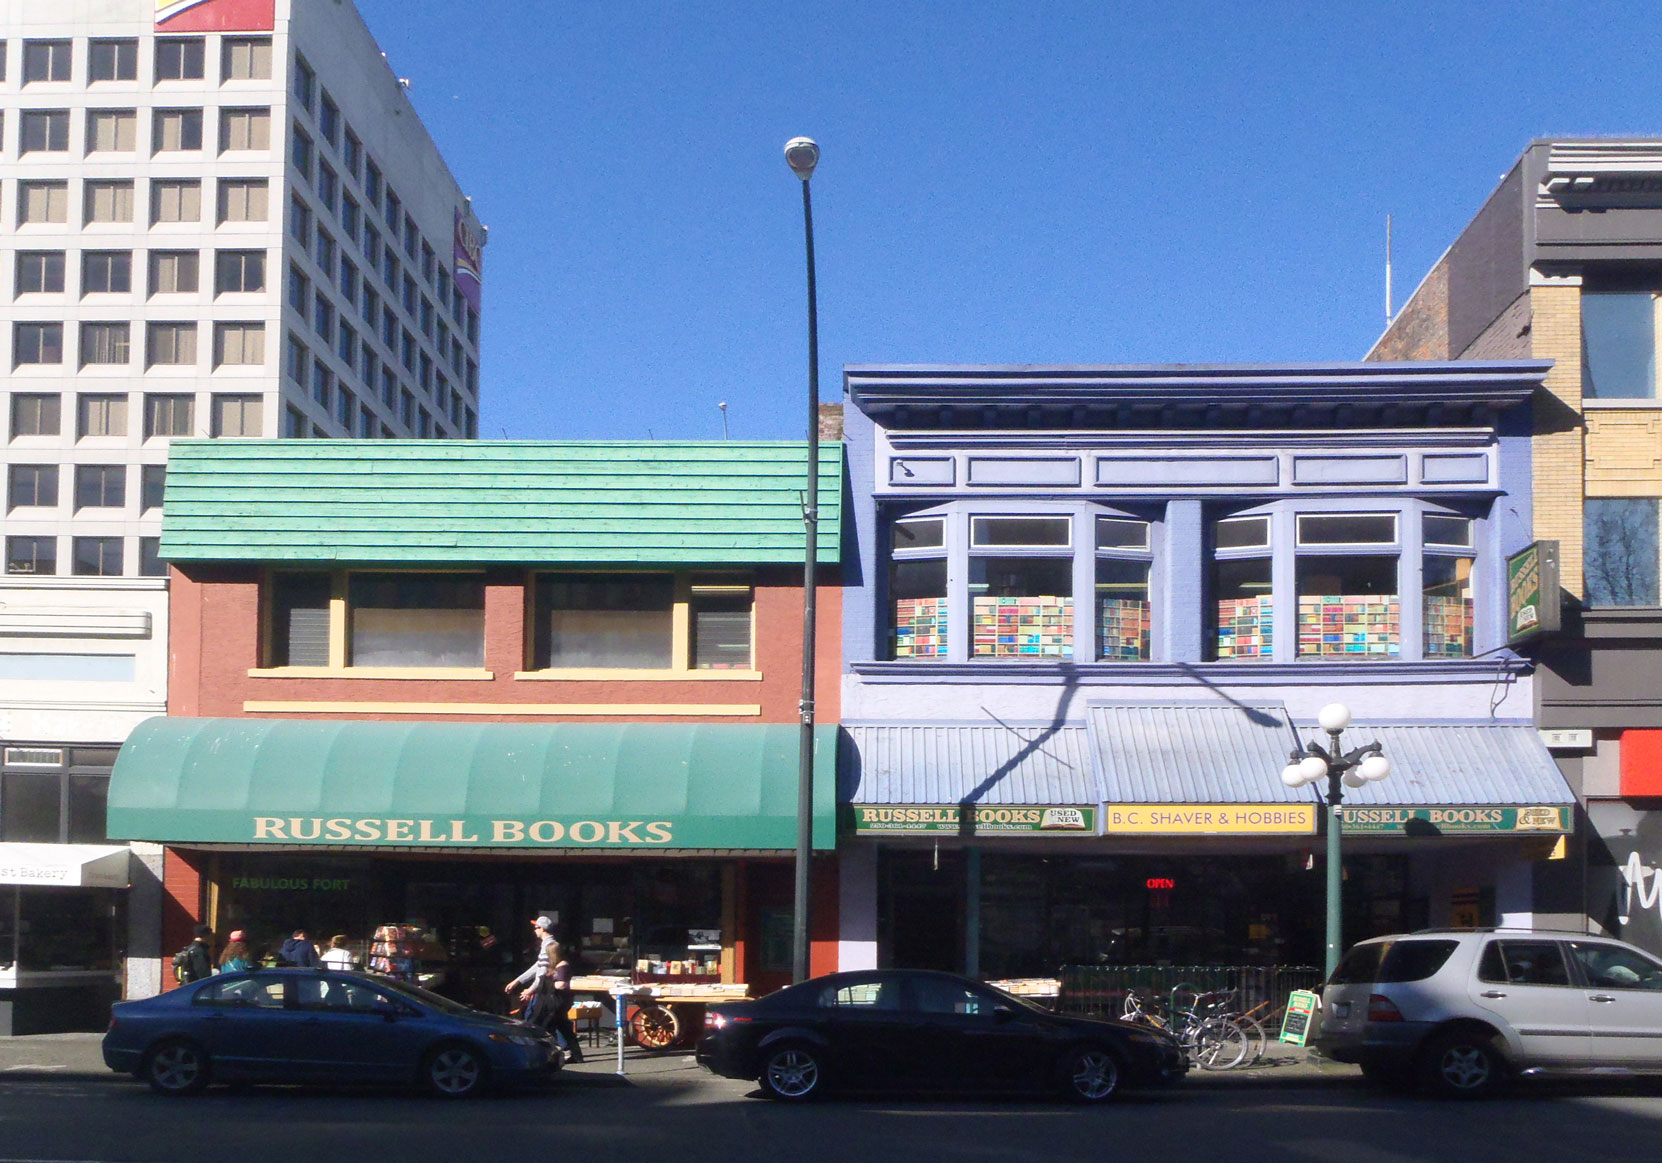 732 Fort Street (left) and 734 Fort Street (right) (photo: Victoria Online Sightseeing Tours)